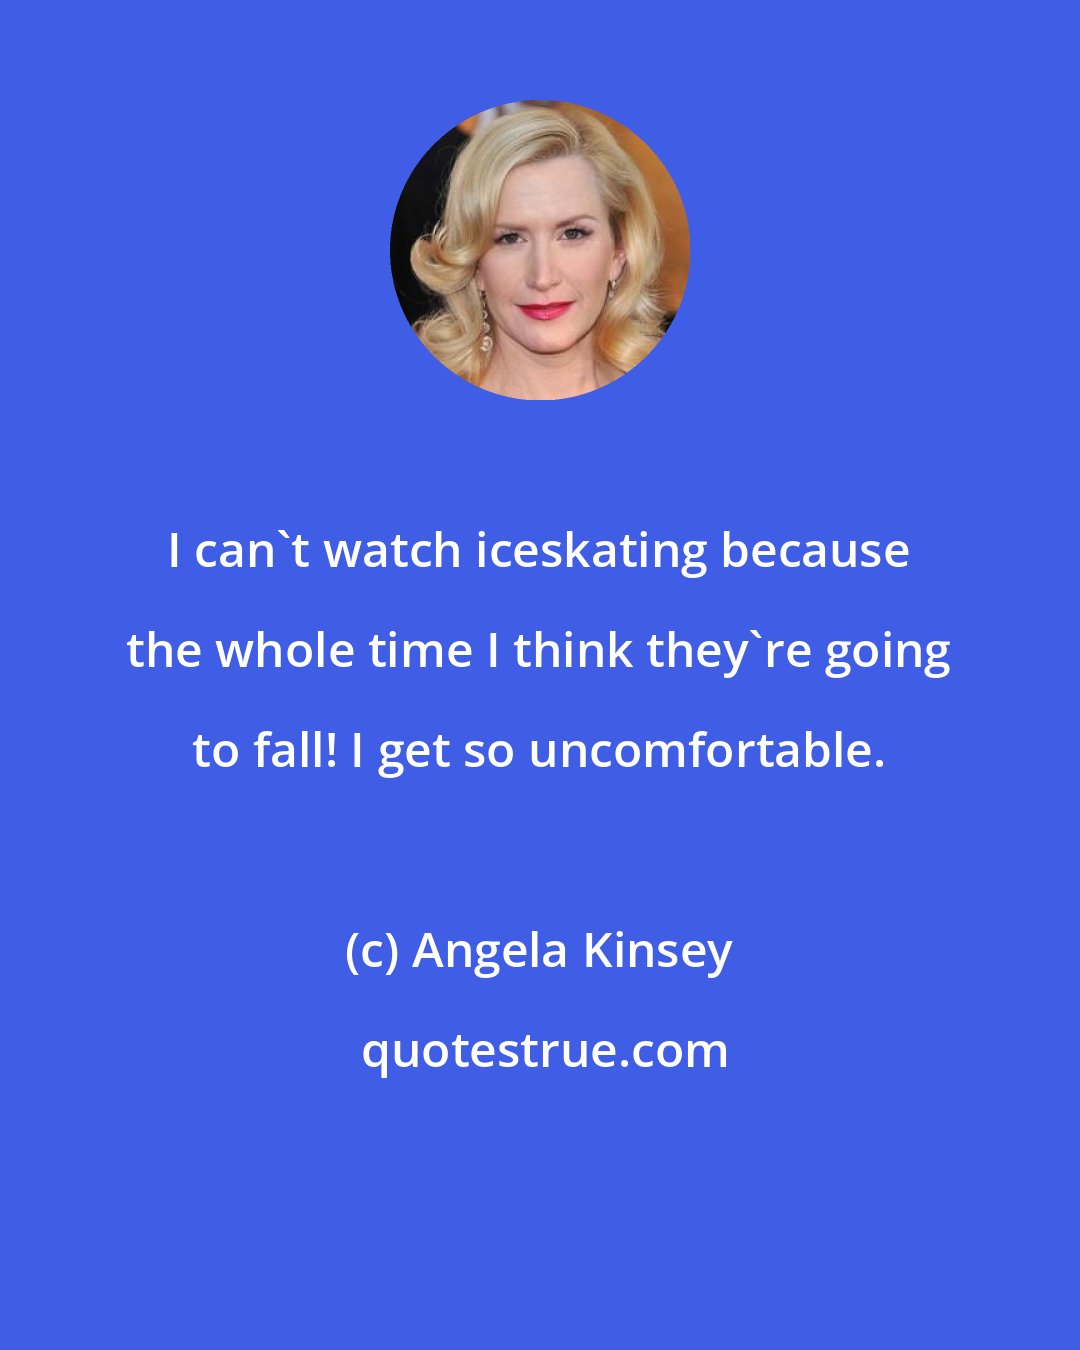 Angela Kinsey: I can't watch iceskating because the whole time I think they're going to fall! I get so uncomfortable.